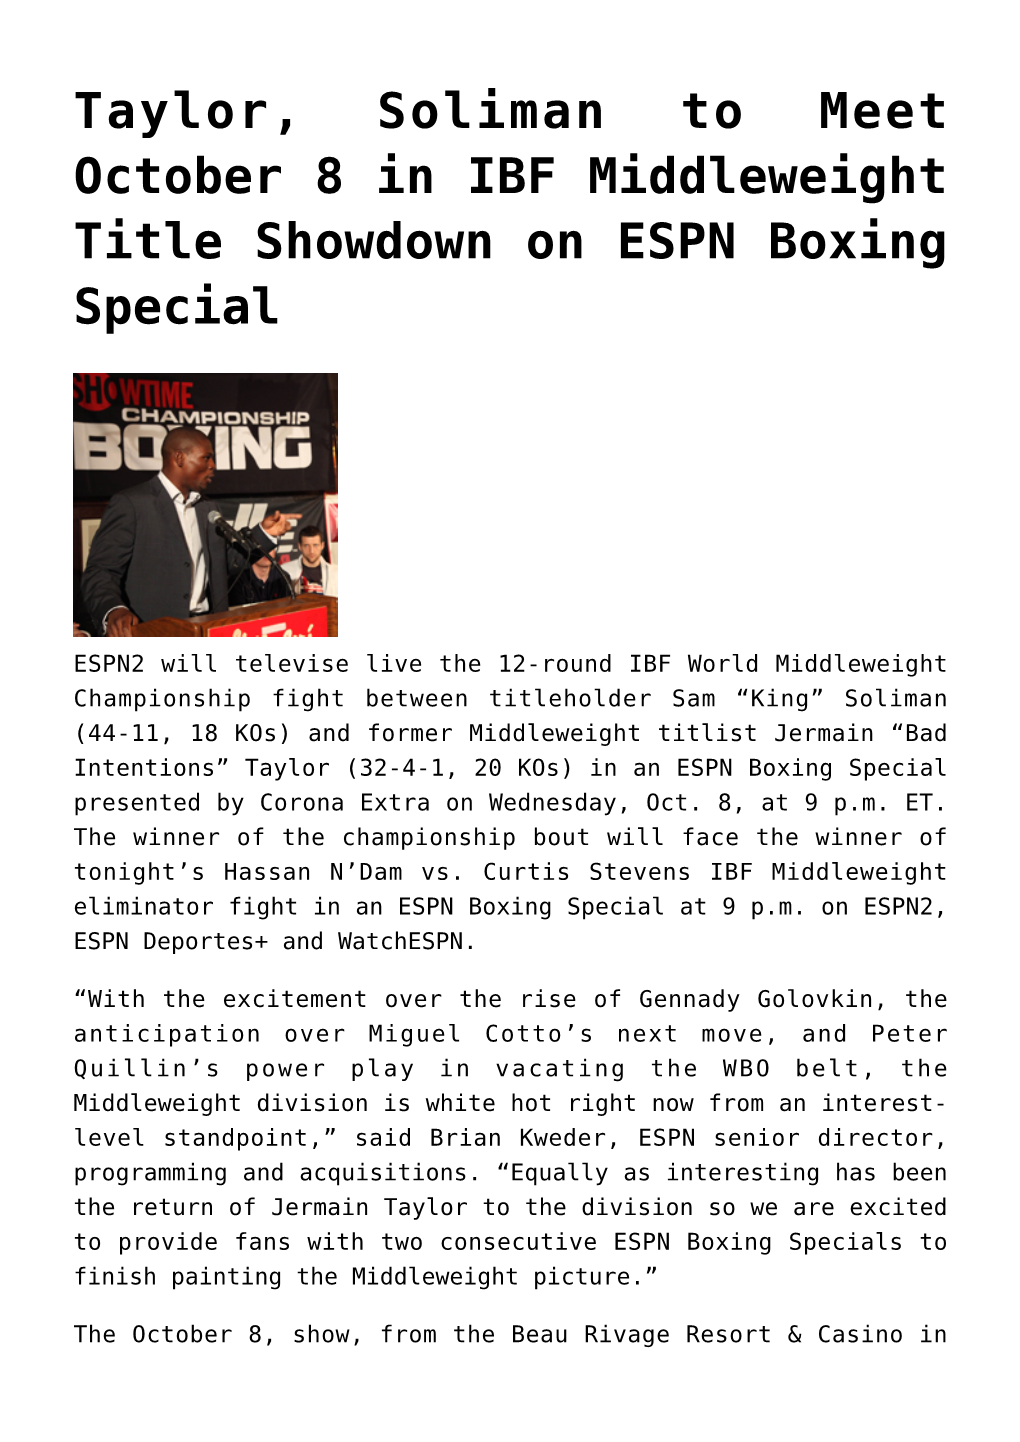 Taylor, Soliman to Meet October 8 in IBF Middleweight Title Showdown on ESPN Boxing Special